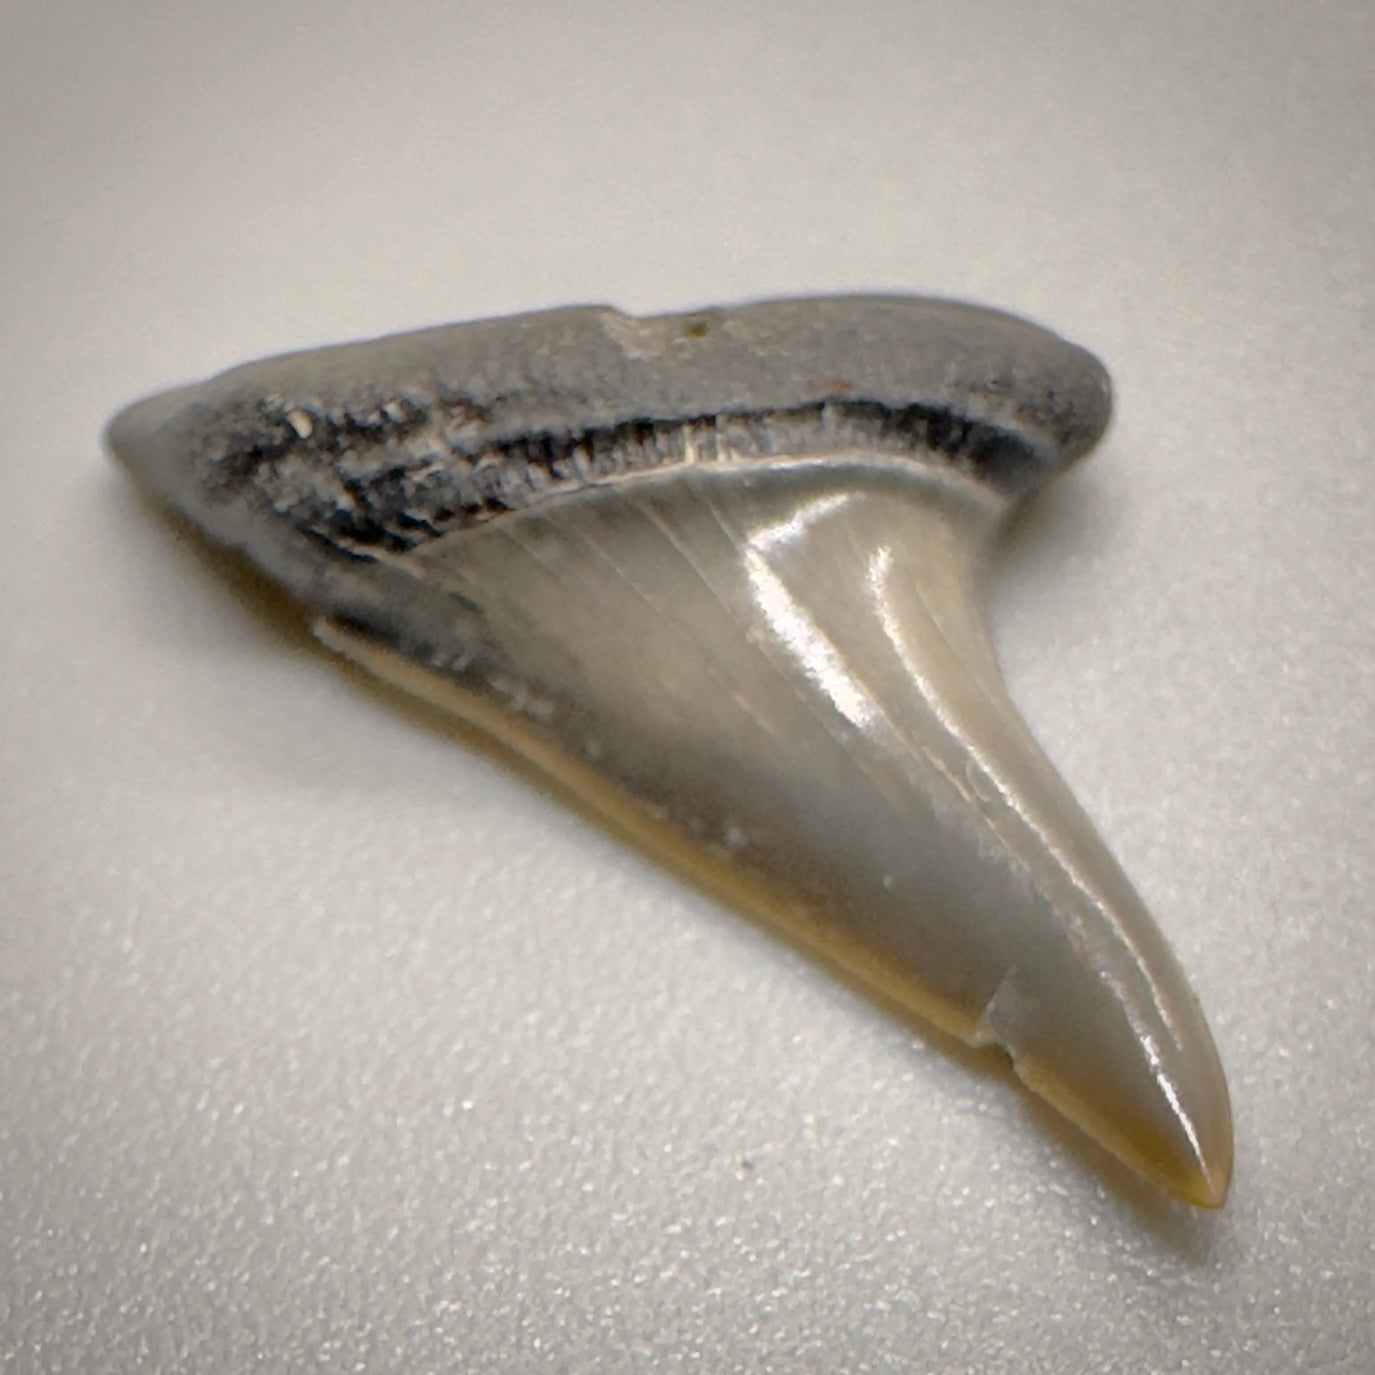 0.87 inches Xiphodolamia ensis - Extinct Mackerel Fossil Shark tooth from Western Kazakhstan R507 front left